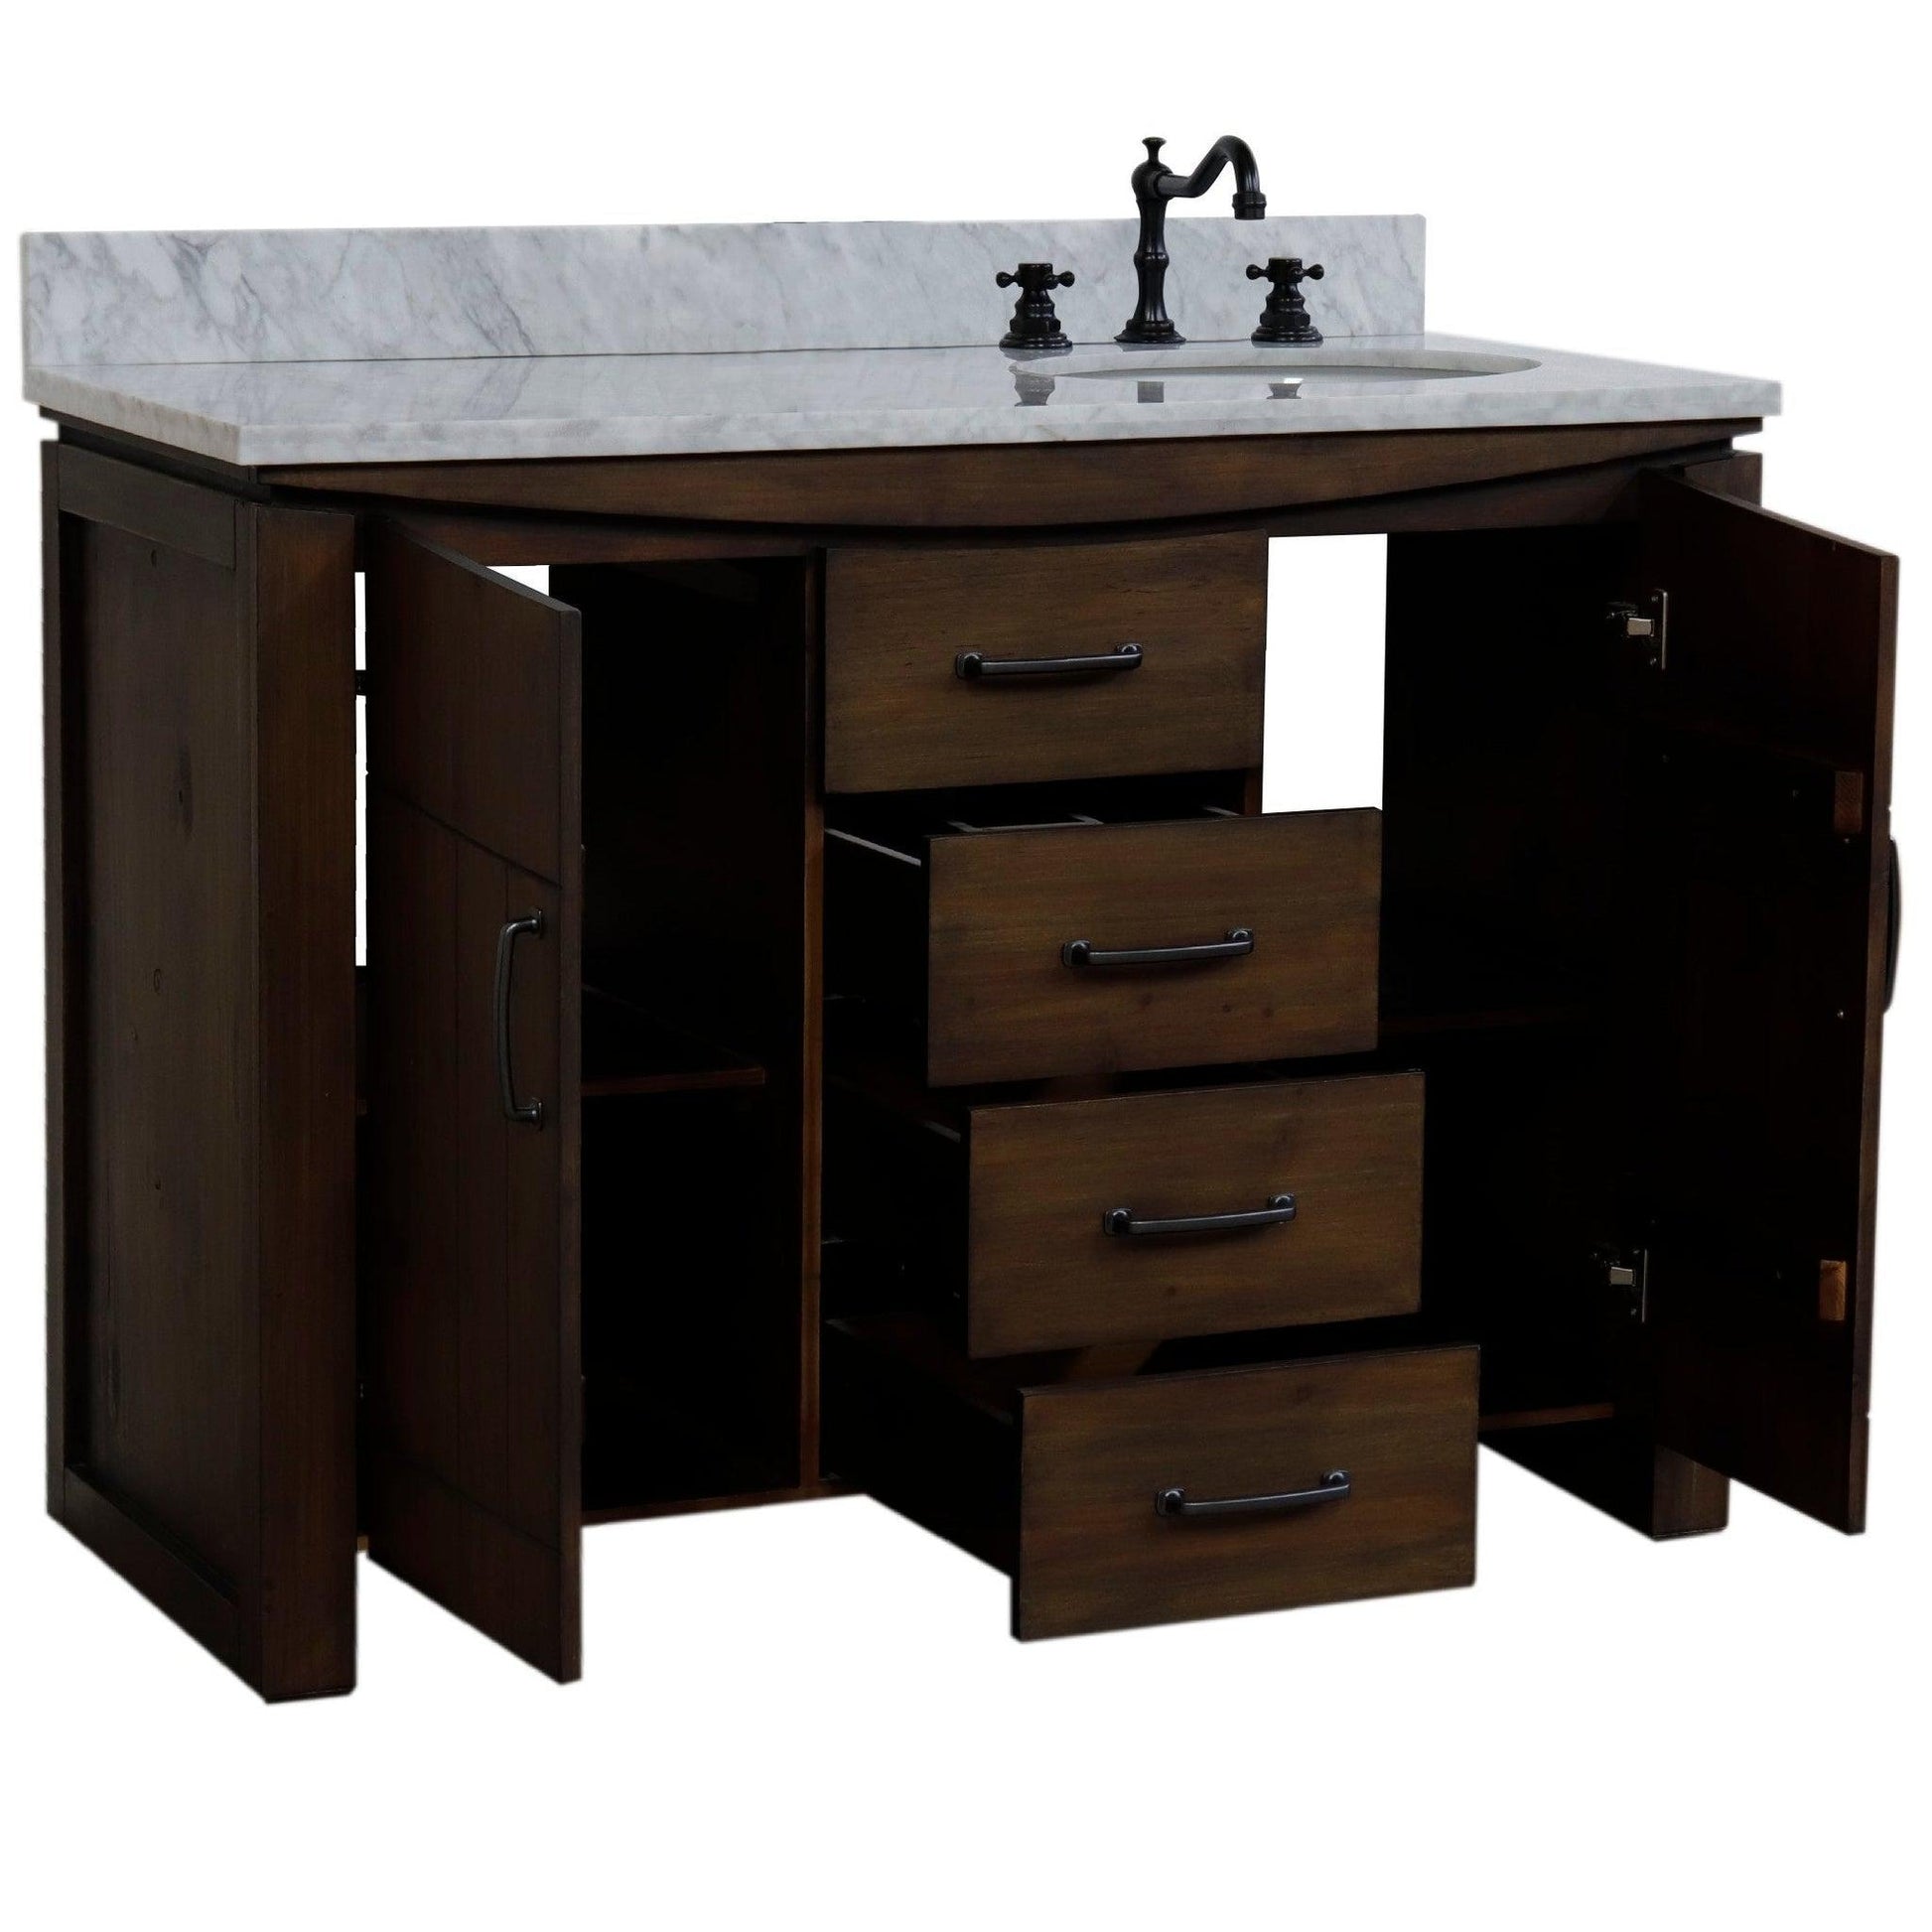 Bellaterra Home 48" 2-Door 3-Drawer Rustic Wood Freestanding Vanity Set With Ceramic Right Offset Undermount Oval Sink and White Marble Top